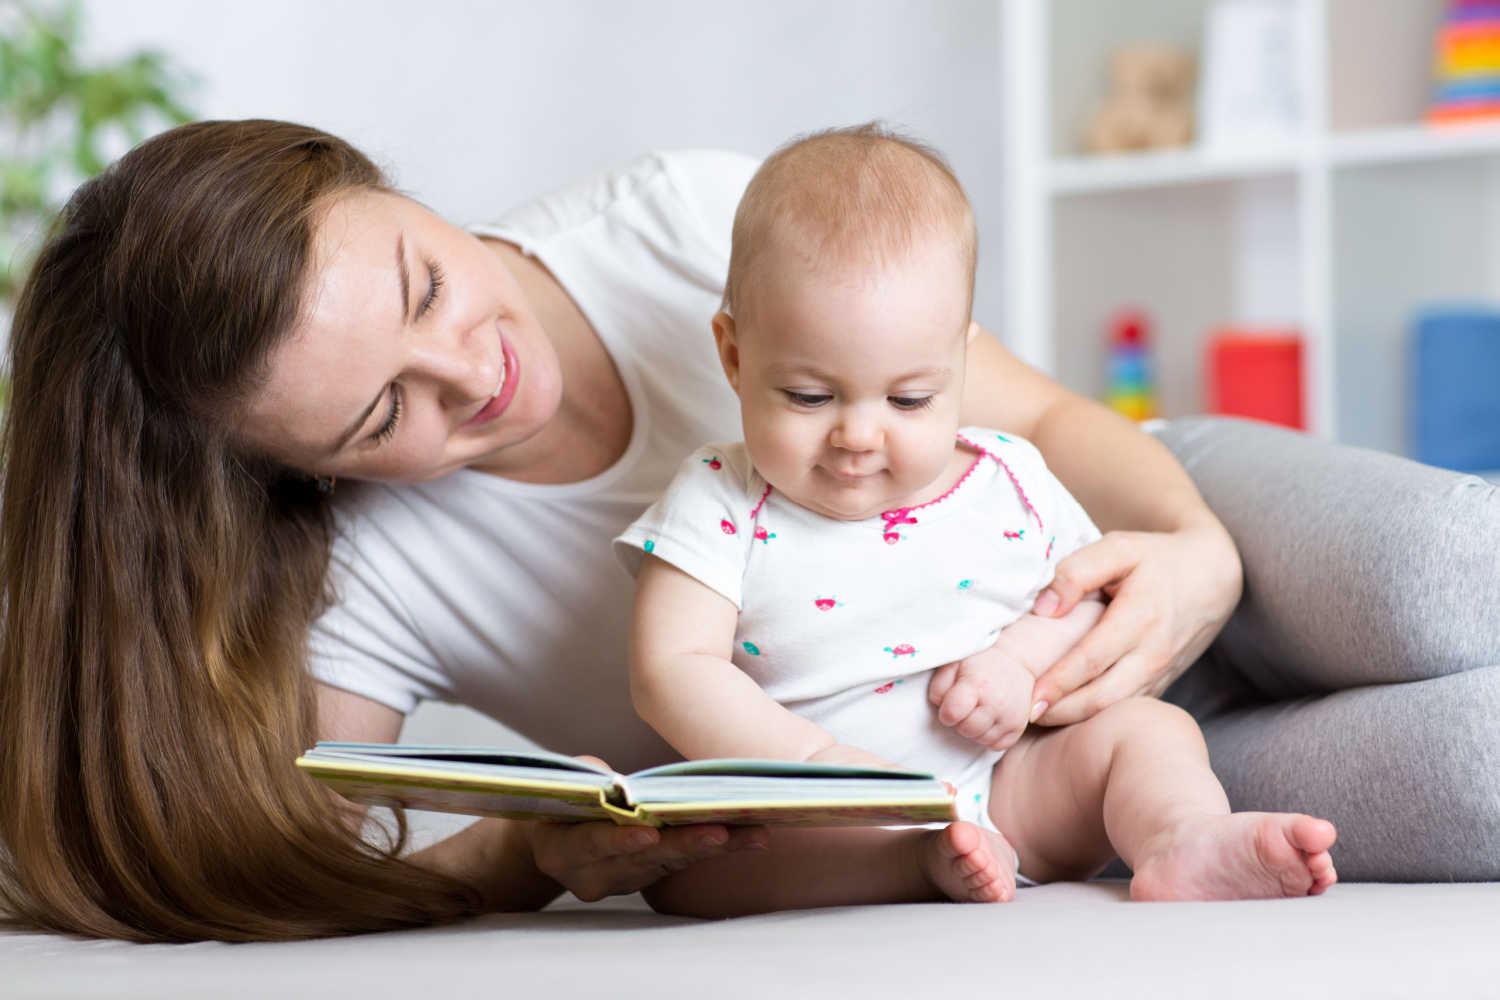 educational activities for 3 month old babies